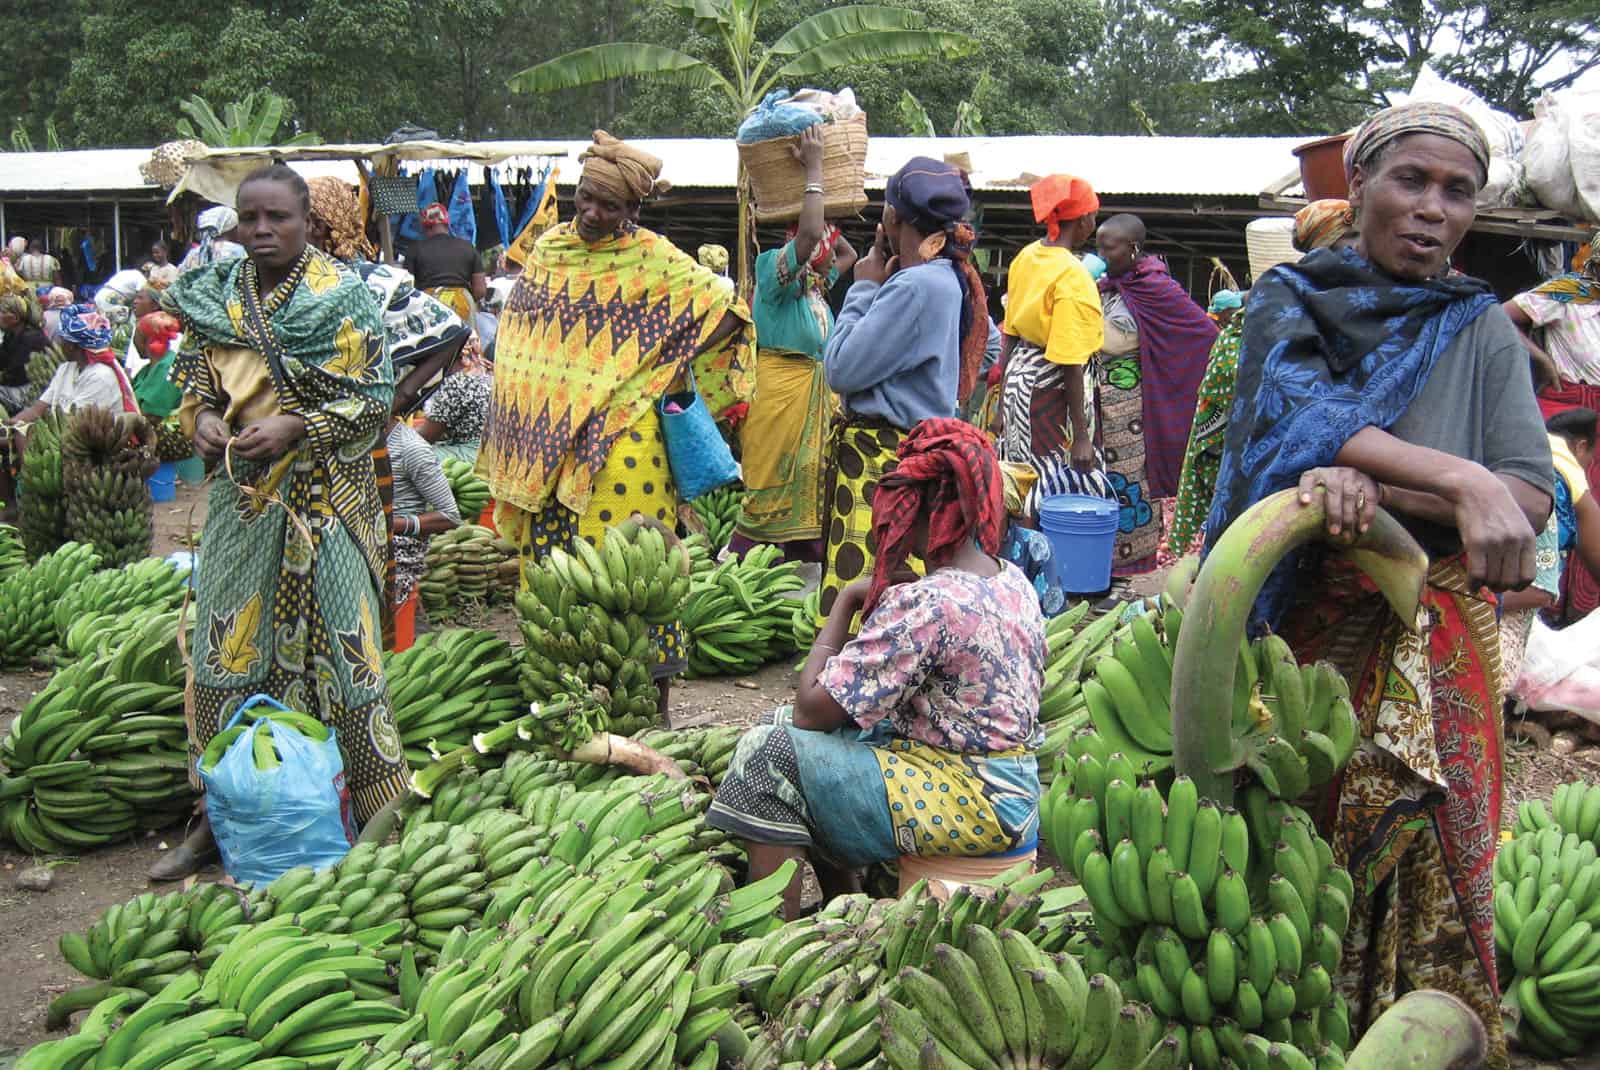 Best things to do in Arusha Tanzania - Scott Brills - A local market in Arusha